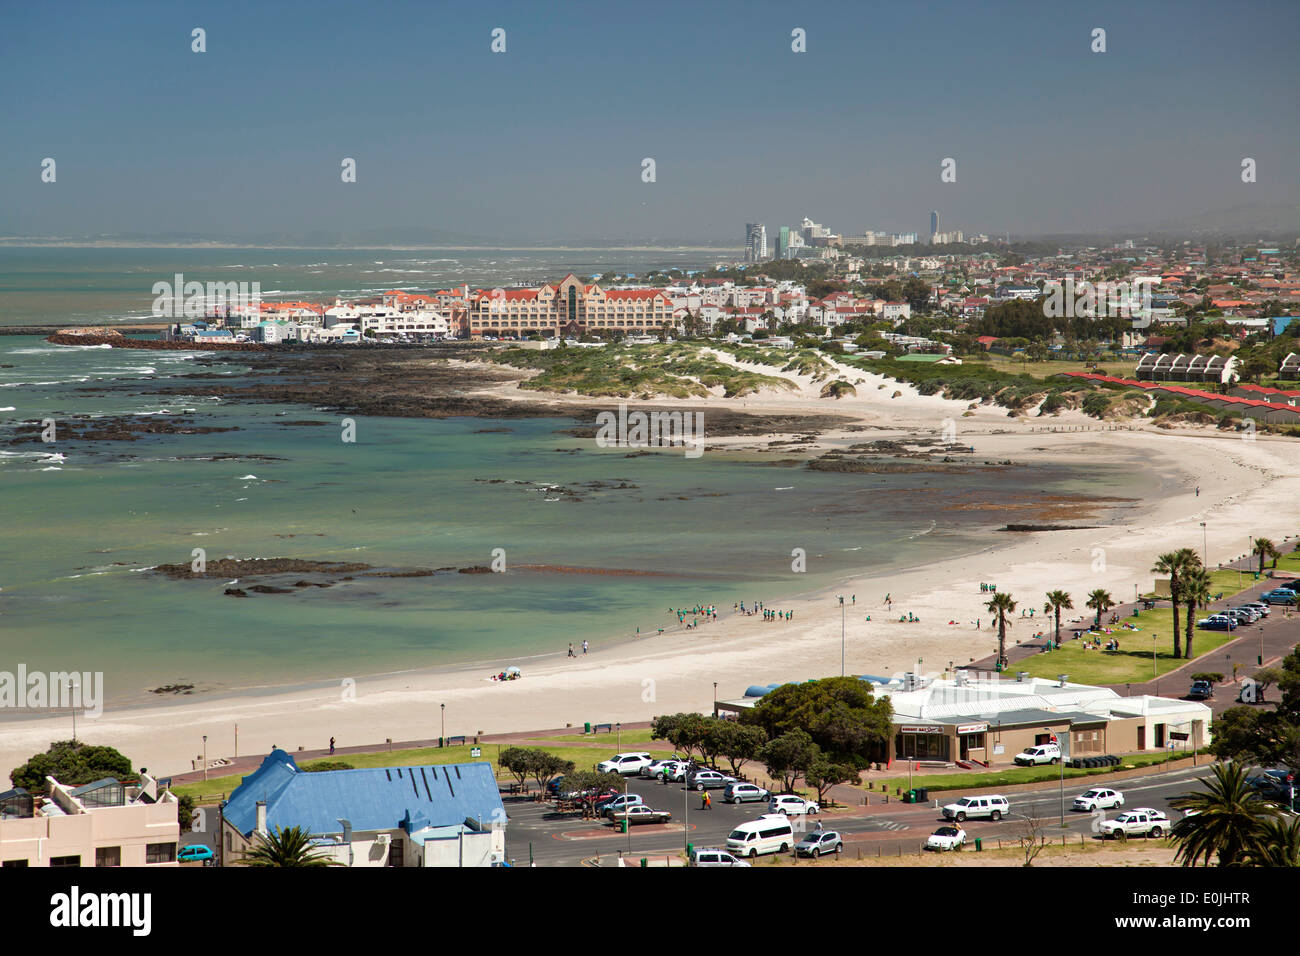 the bay and beach in Gordons Bay, Western Cape, South Africa Stock Photo